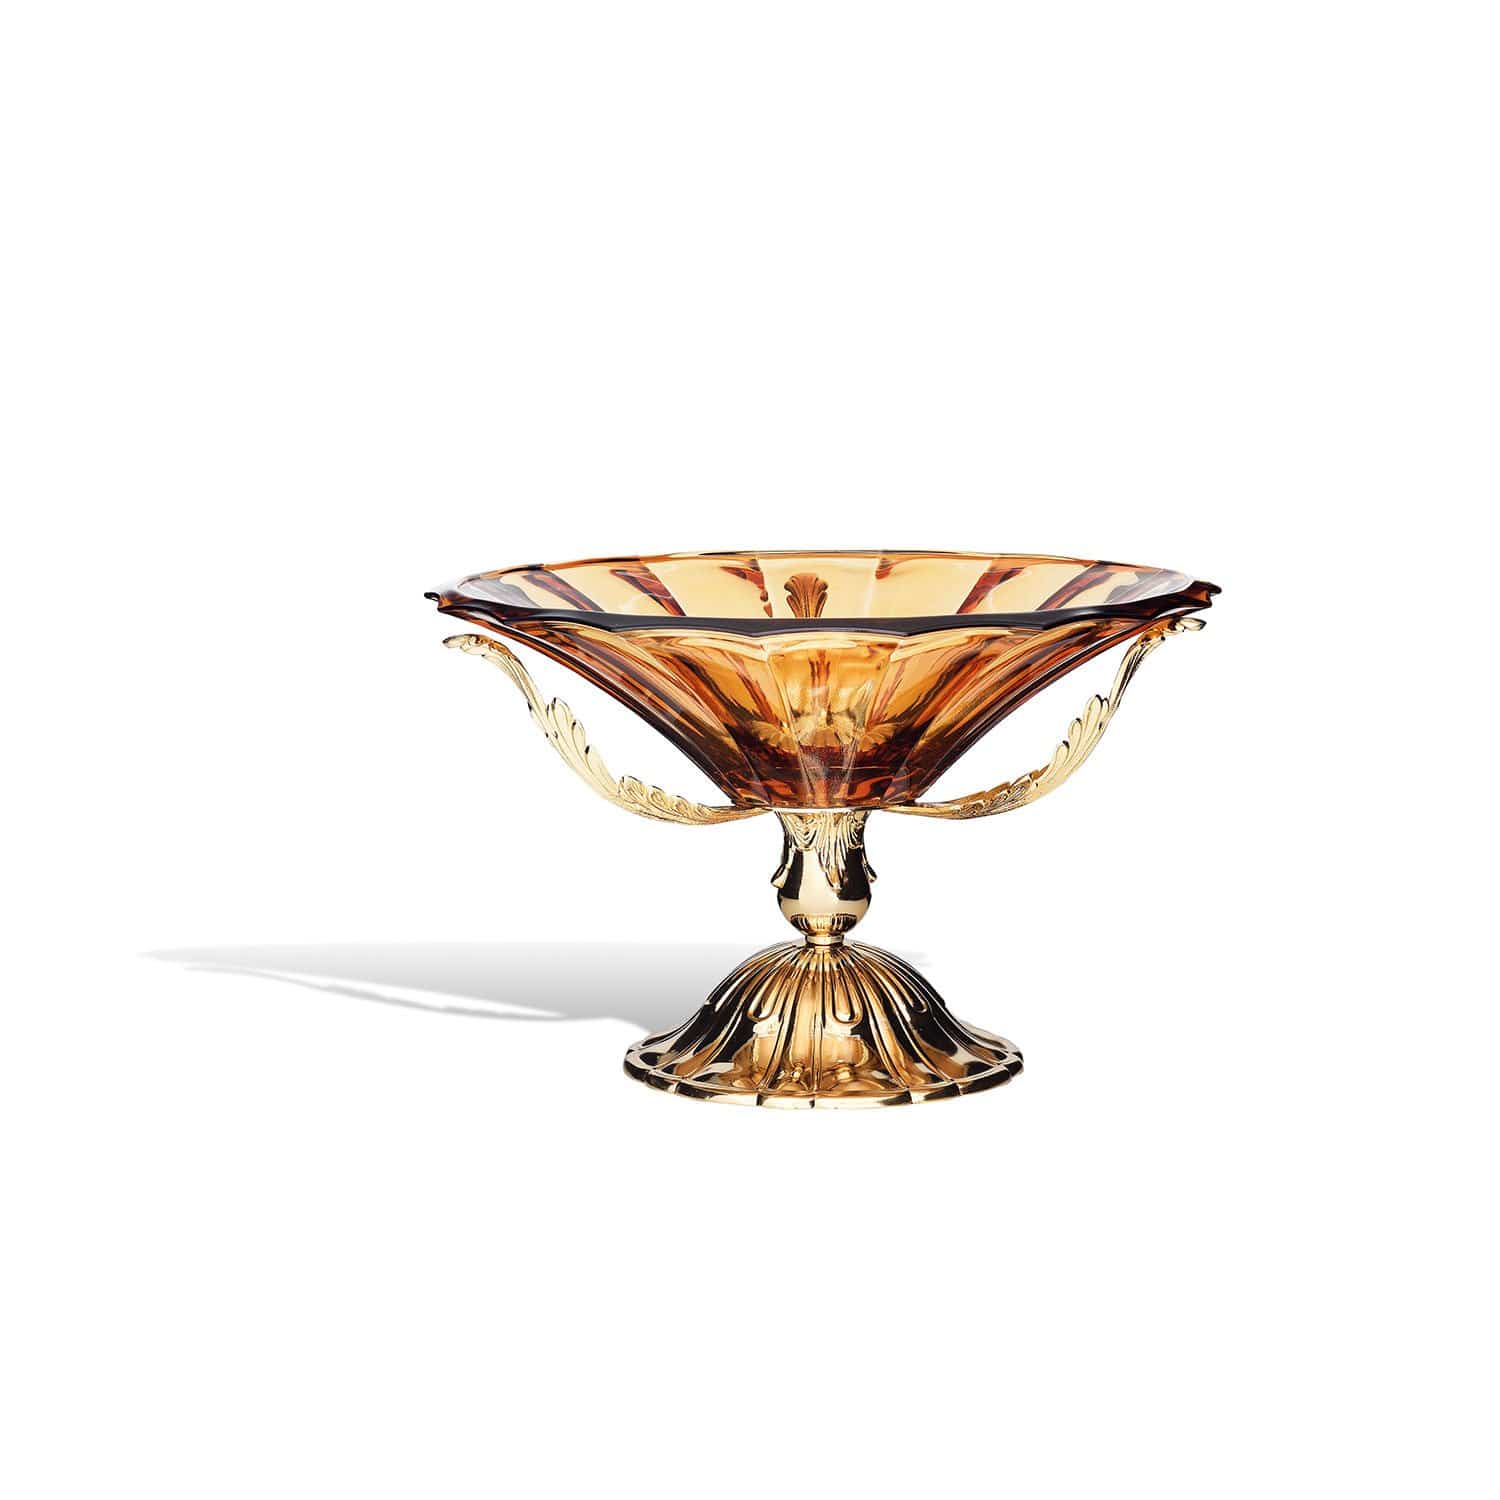 ROMA CENTERPIECE BOWL AMBER GLASS - DC6155/OR-AM